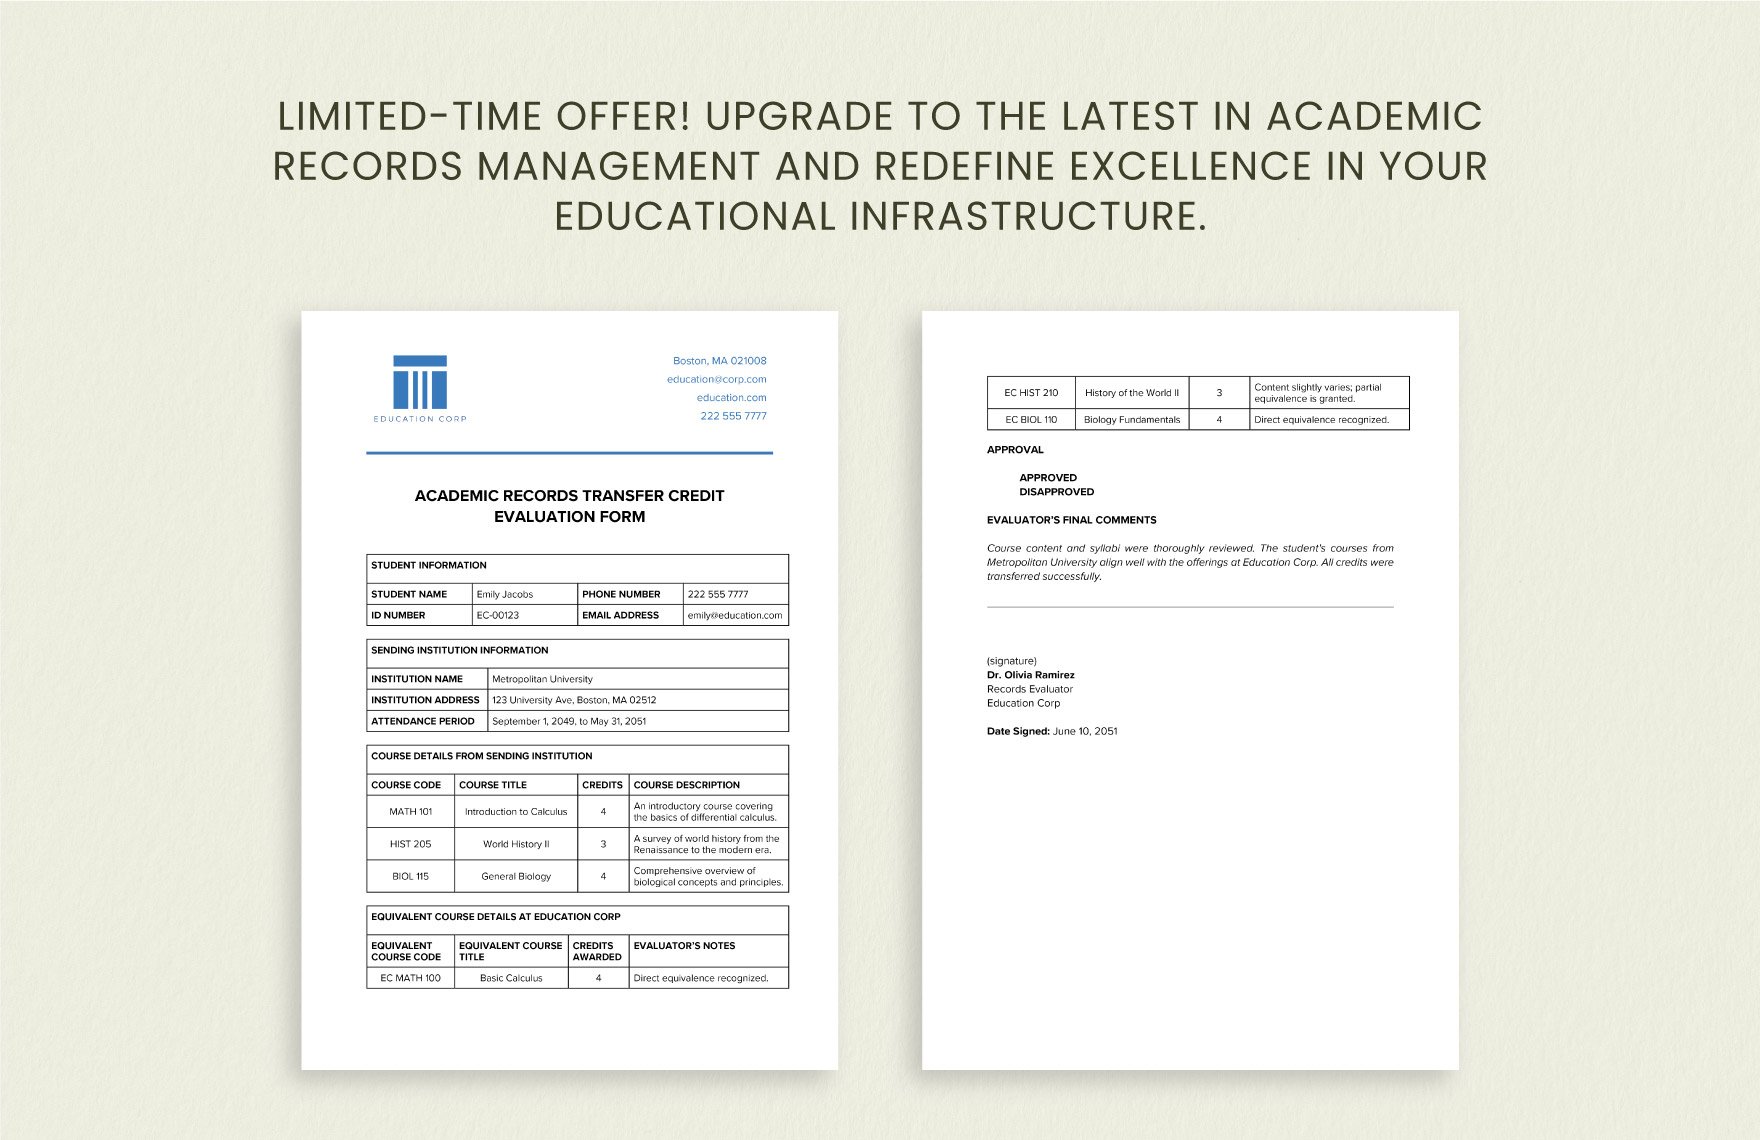 Academic Records Transfer Credit Evaluation Form Template